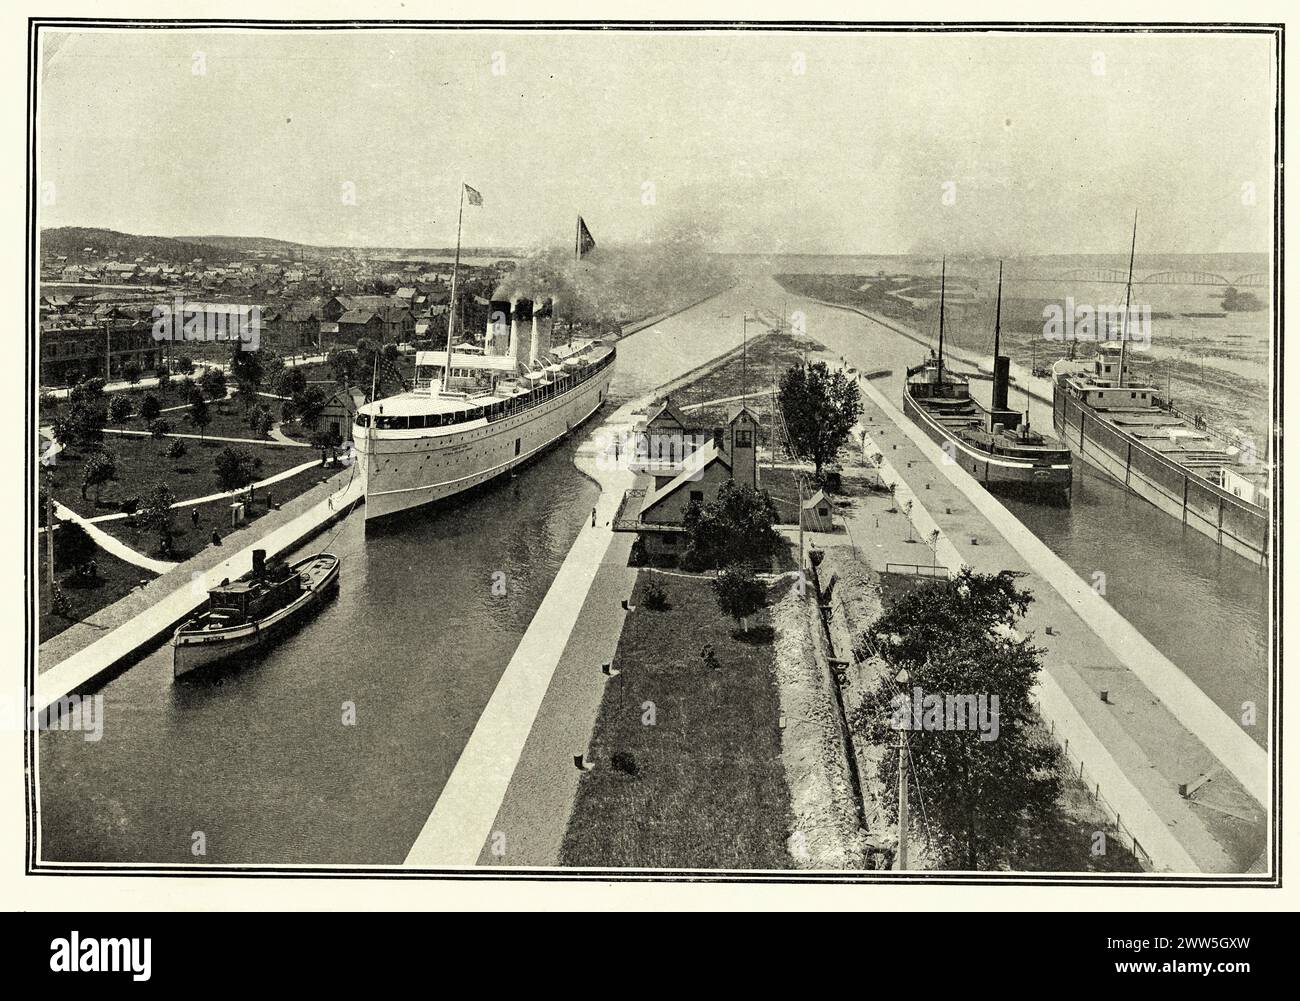 Vintage photograph of Ships passing through the Sault Ste. Marie Canal, Ontario, Canada, 1902 Stock Photo